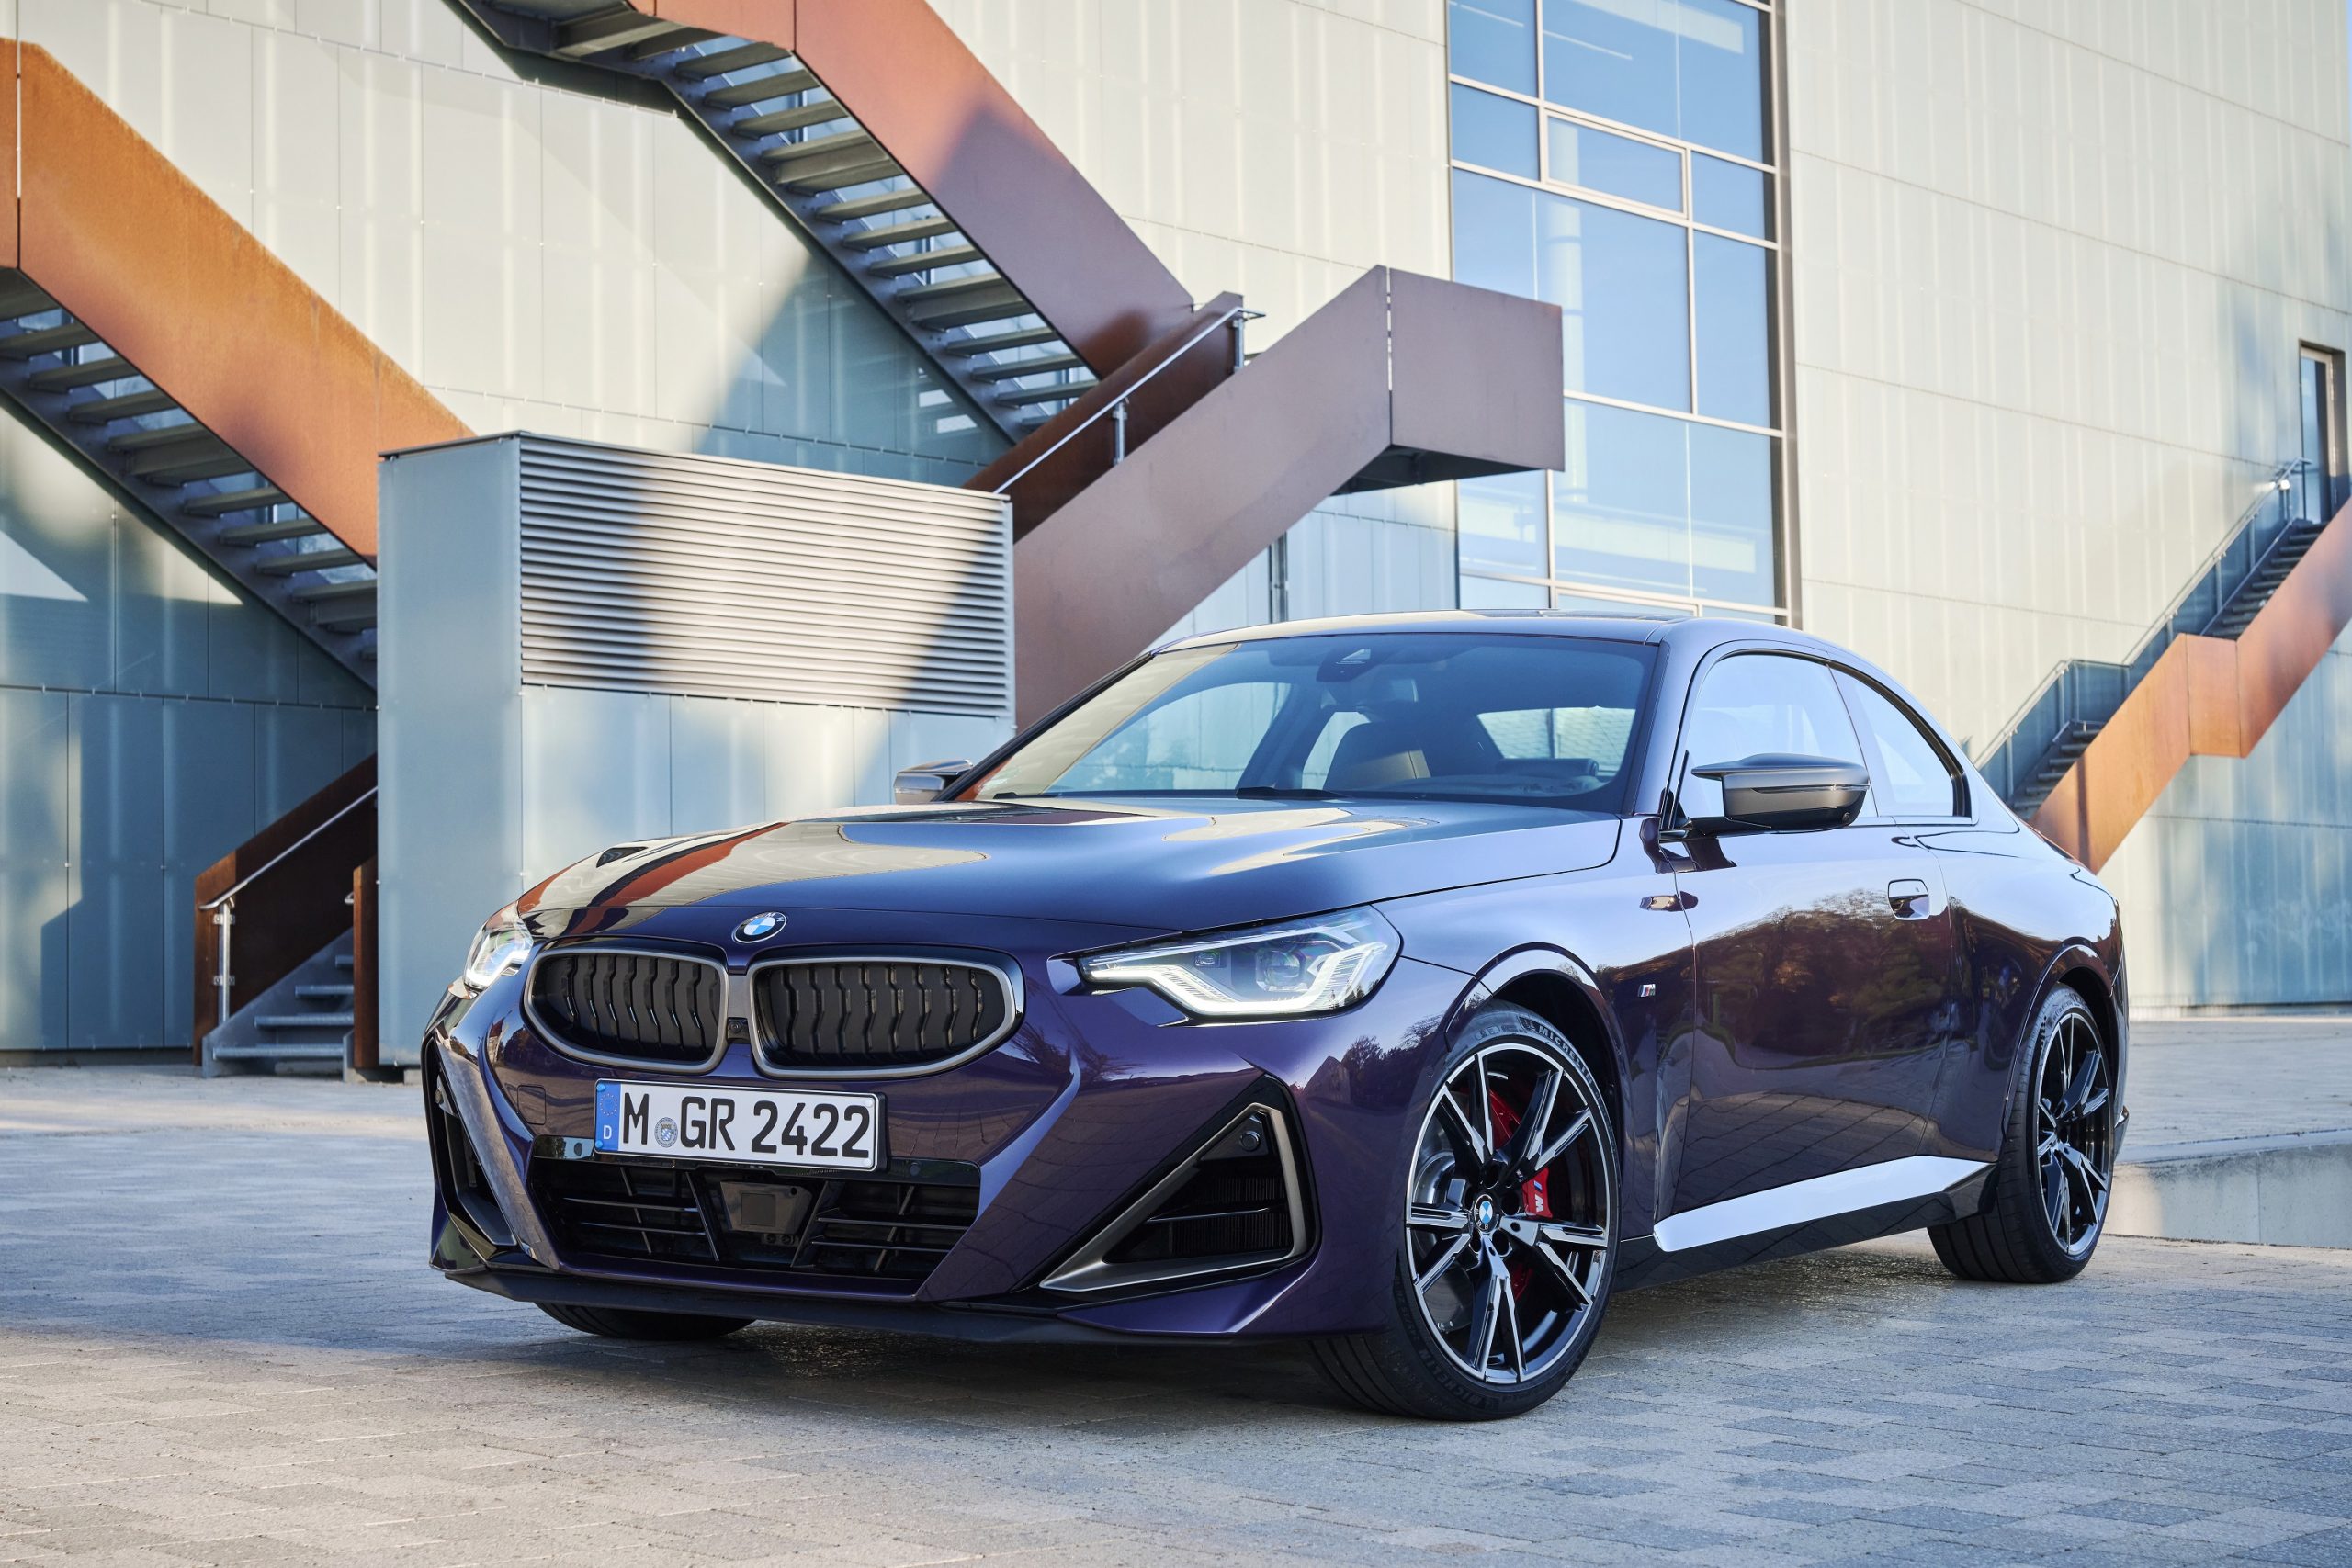 A purple BMW M240i sports car shot from the front 3/4